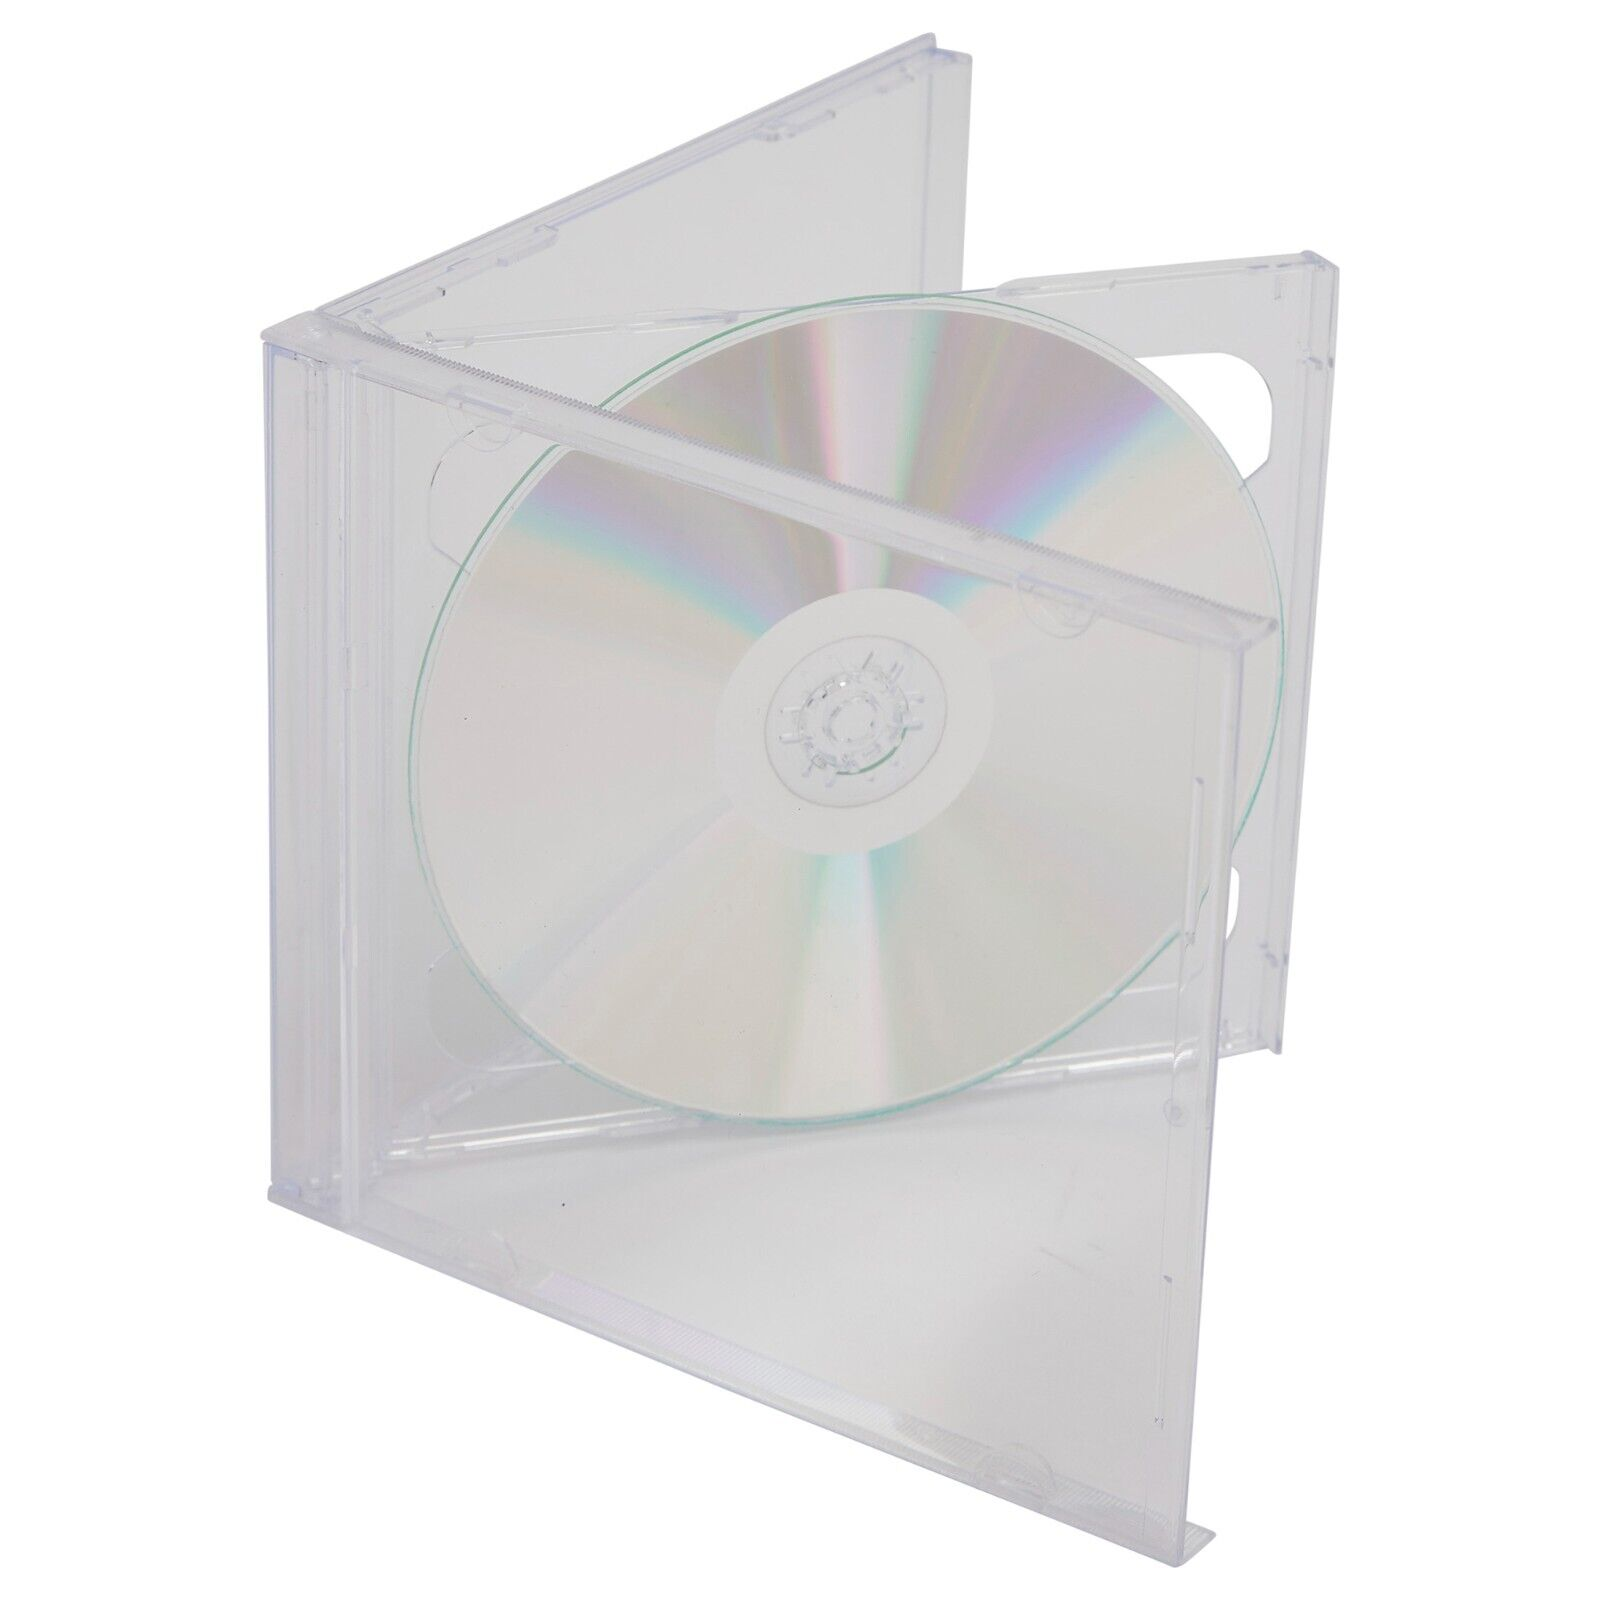 Double Jewel Case w/Assembled Clear Tray (25 Pack) Product Image